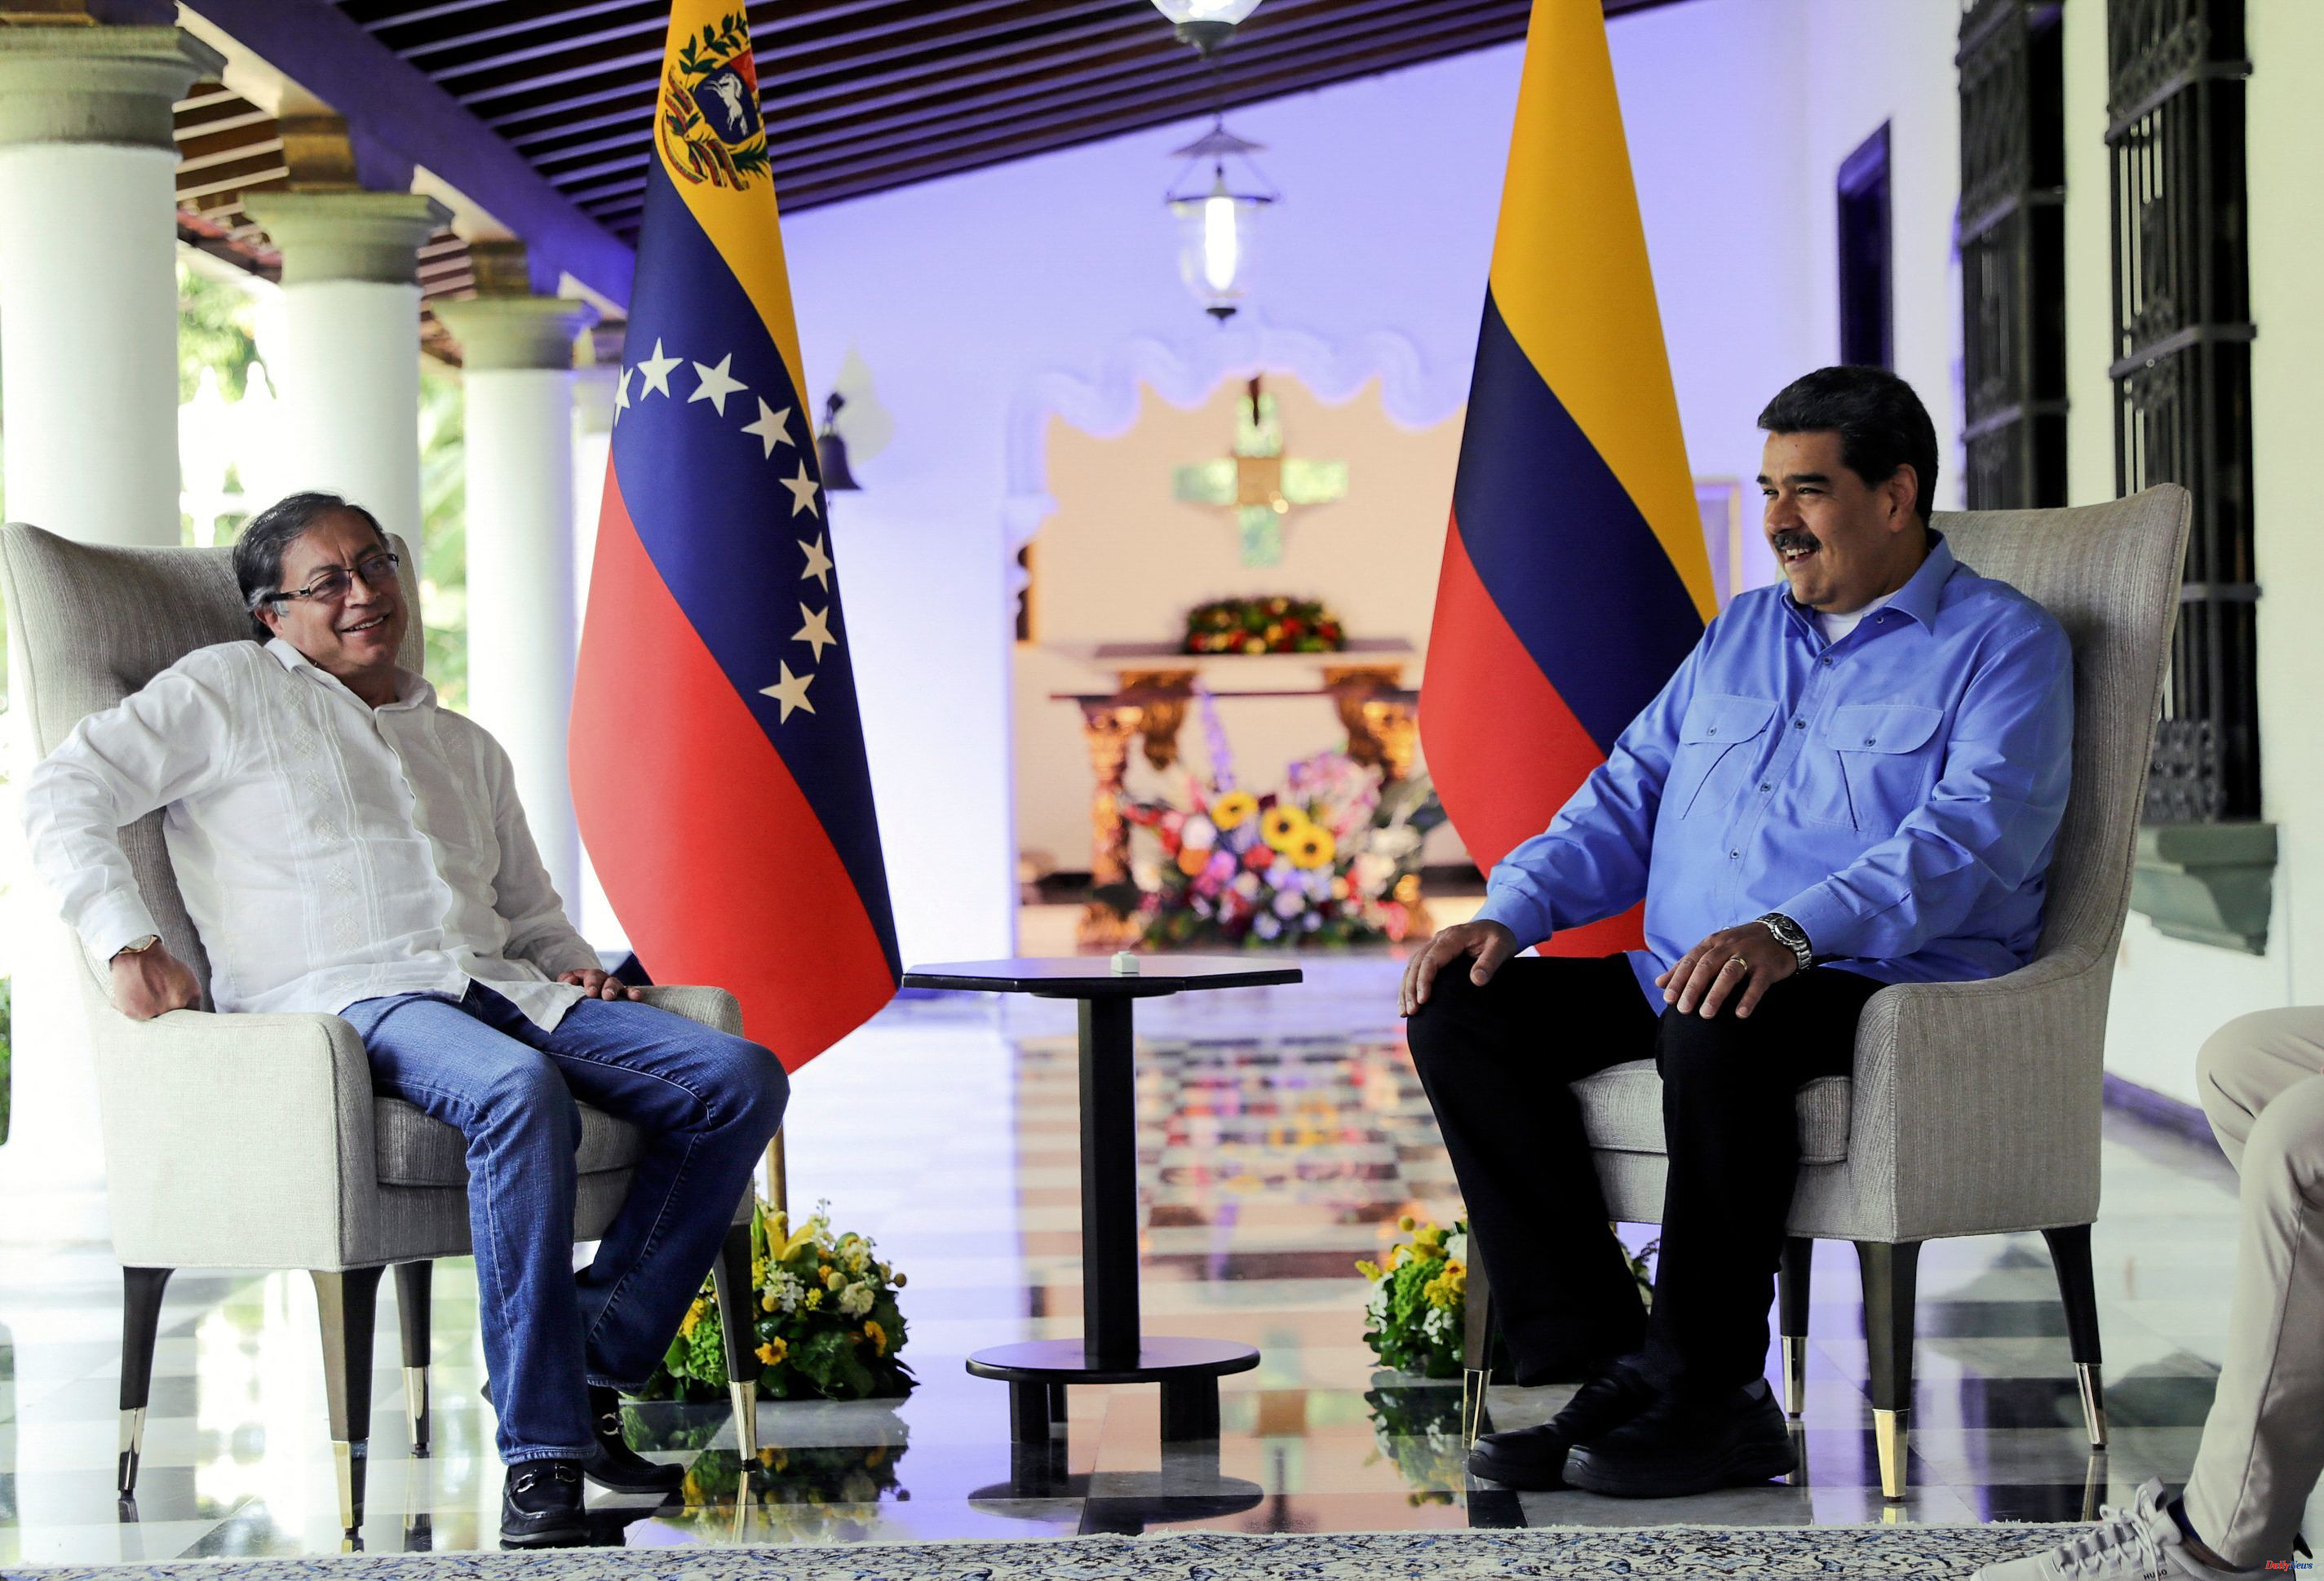 Latin America Maduro and Petro strengthen their alliance in search of "the greatest sum of happiness"